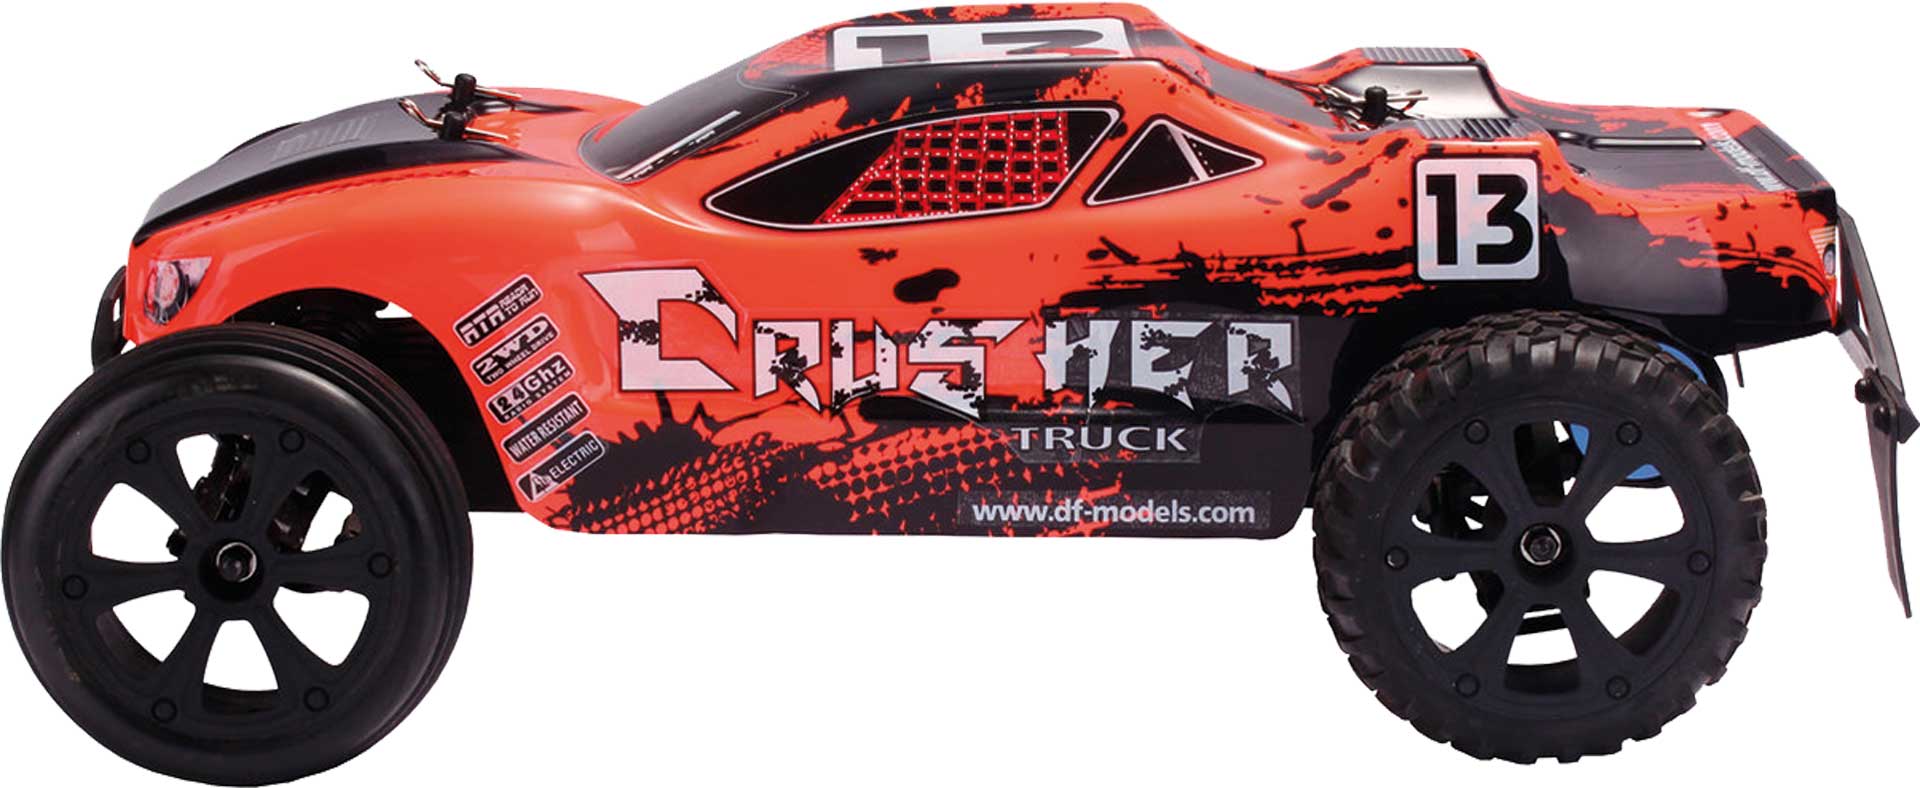 DRIVE & FLY MODELS CRUSHER TRUCK 2WD RTR 1/10